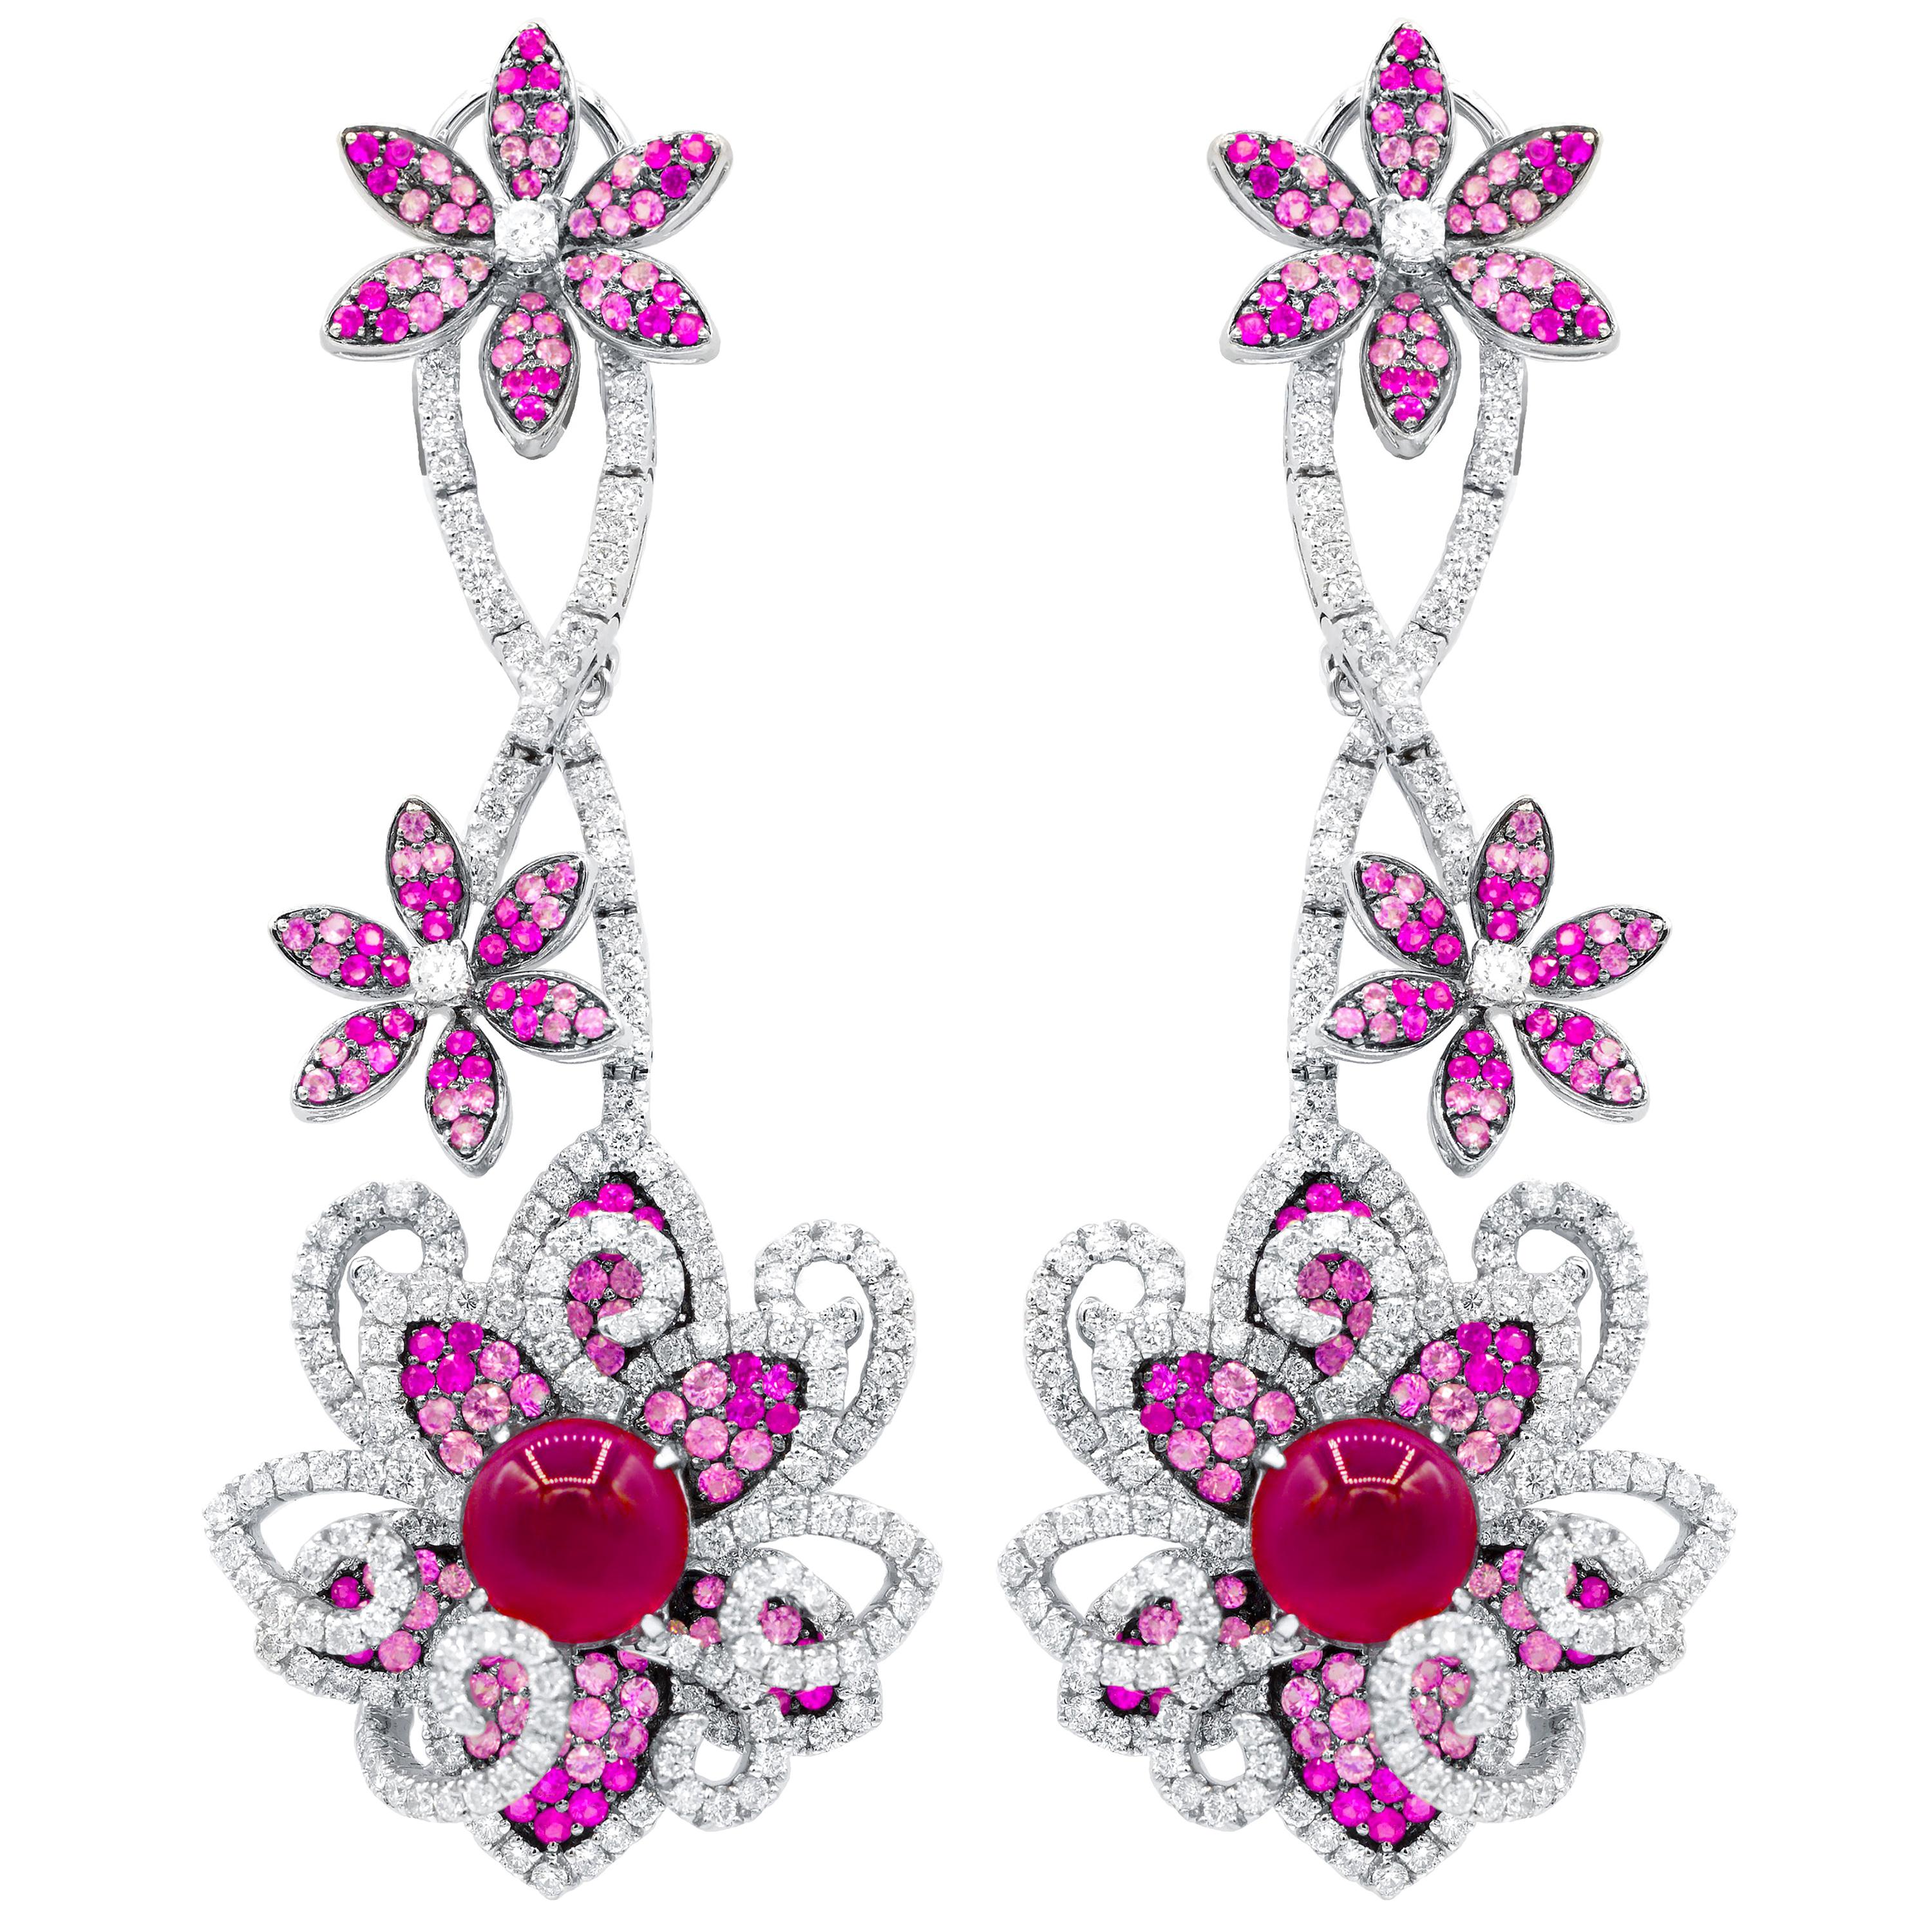 Diana M. 12.76 Carat Ruby and Diamond Earrings For Sale